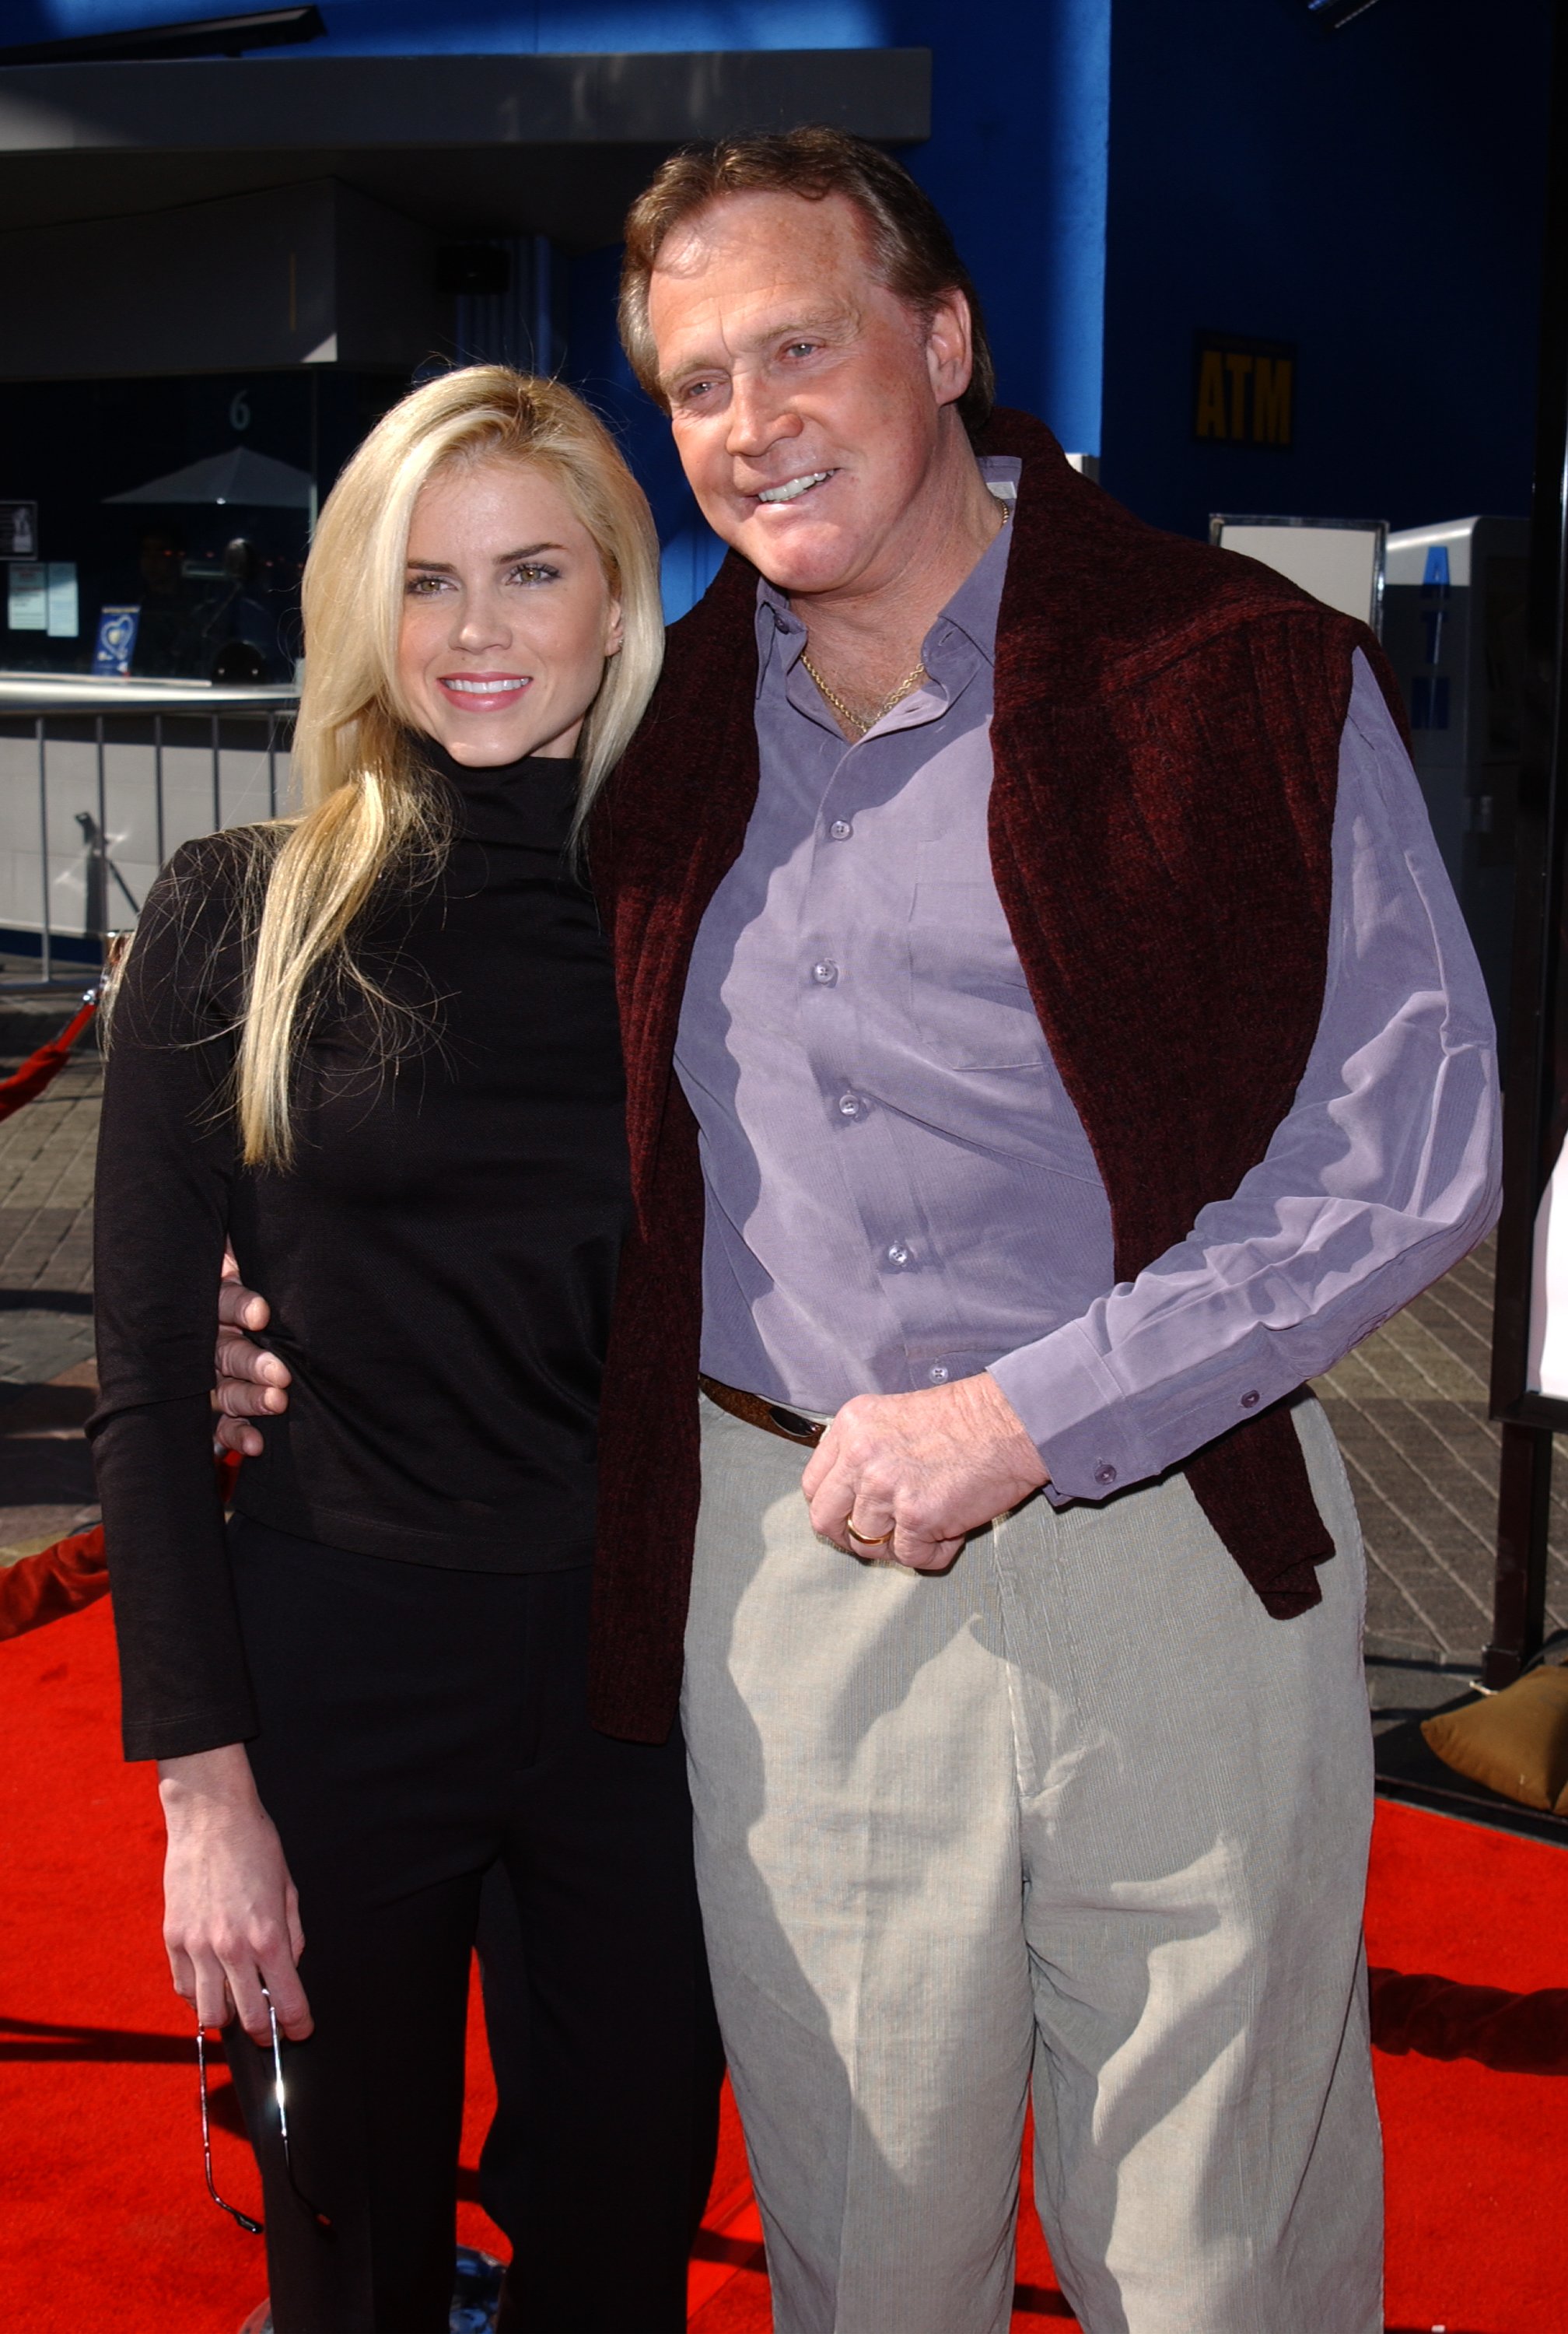 Lee Majors and fiance Faith Noelle attend the premiere of the film Big Fat Liar February 2, 2002 at Universal Studios in Los Angeles | Source: Getty Images